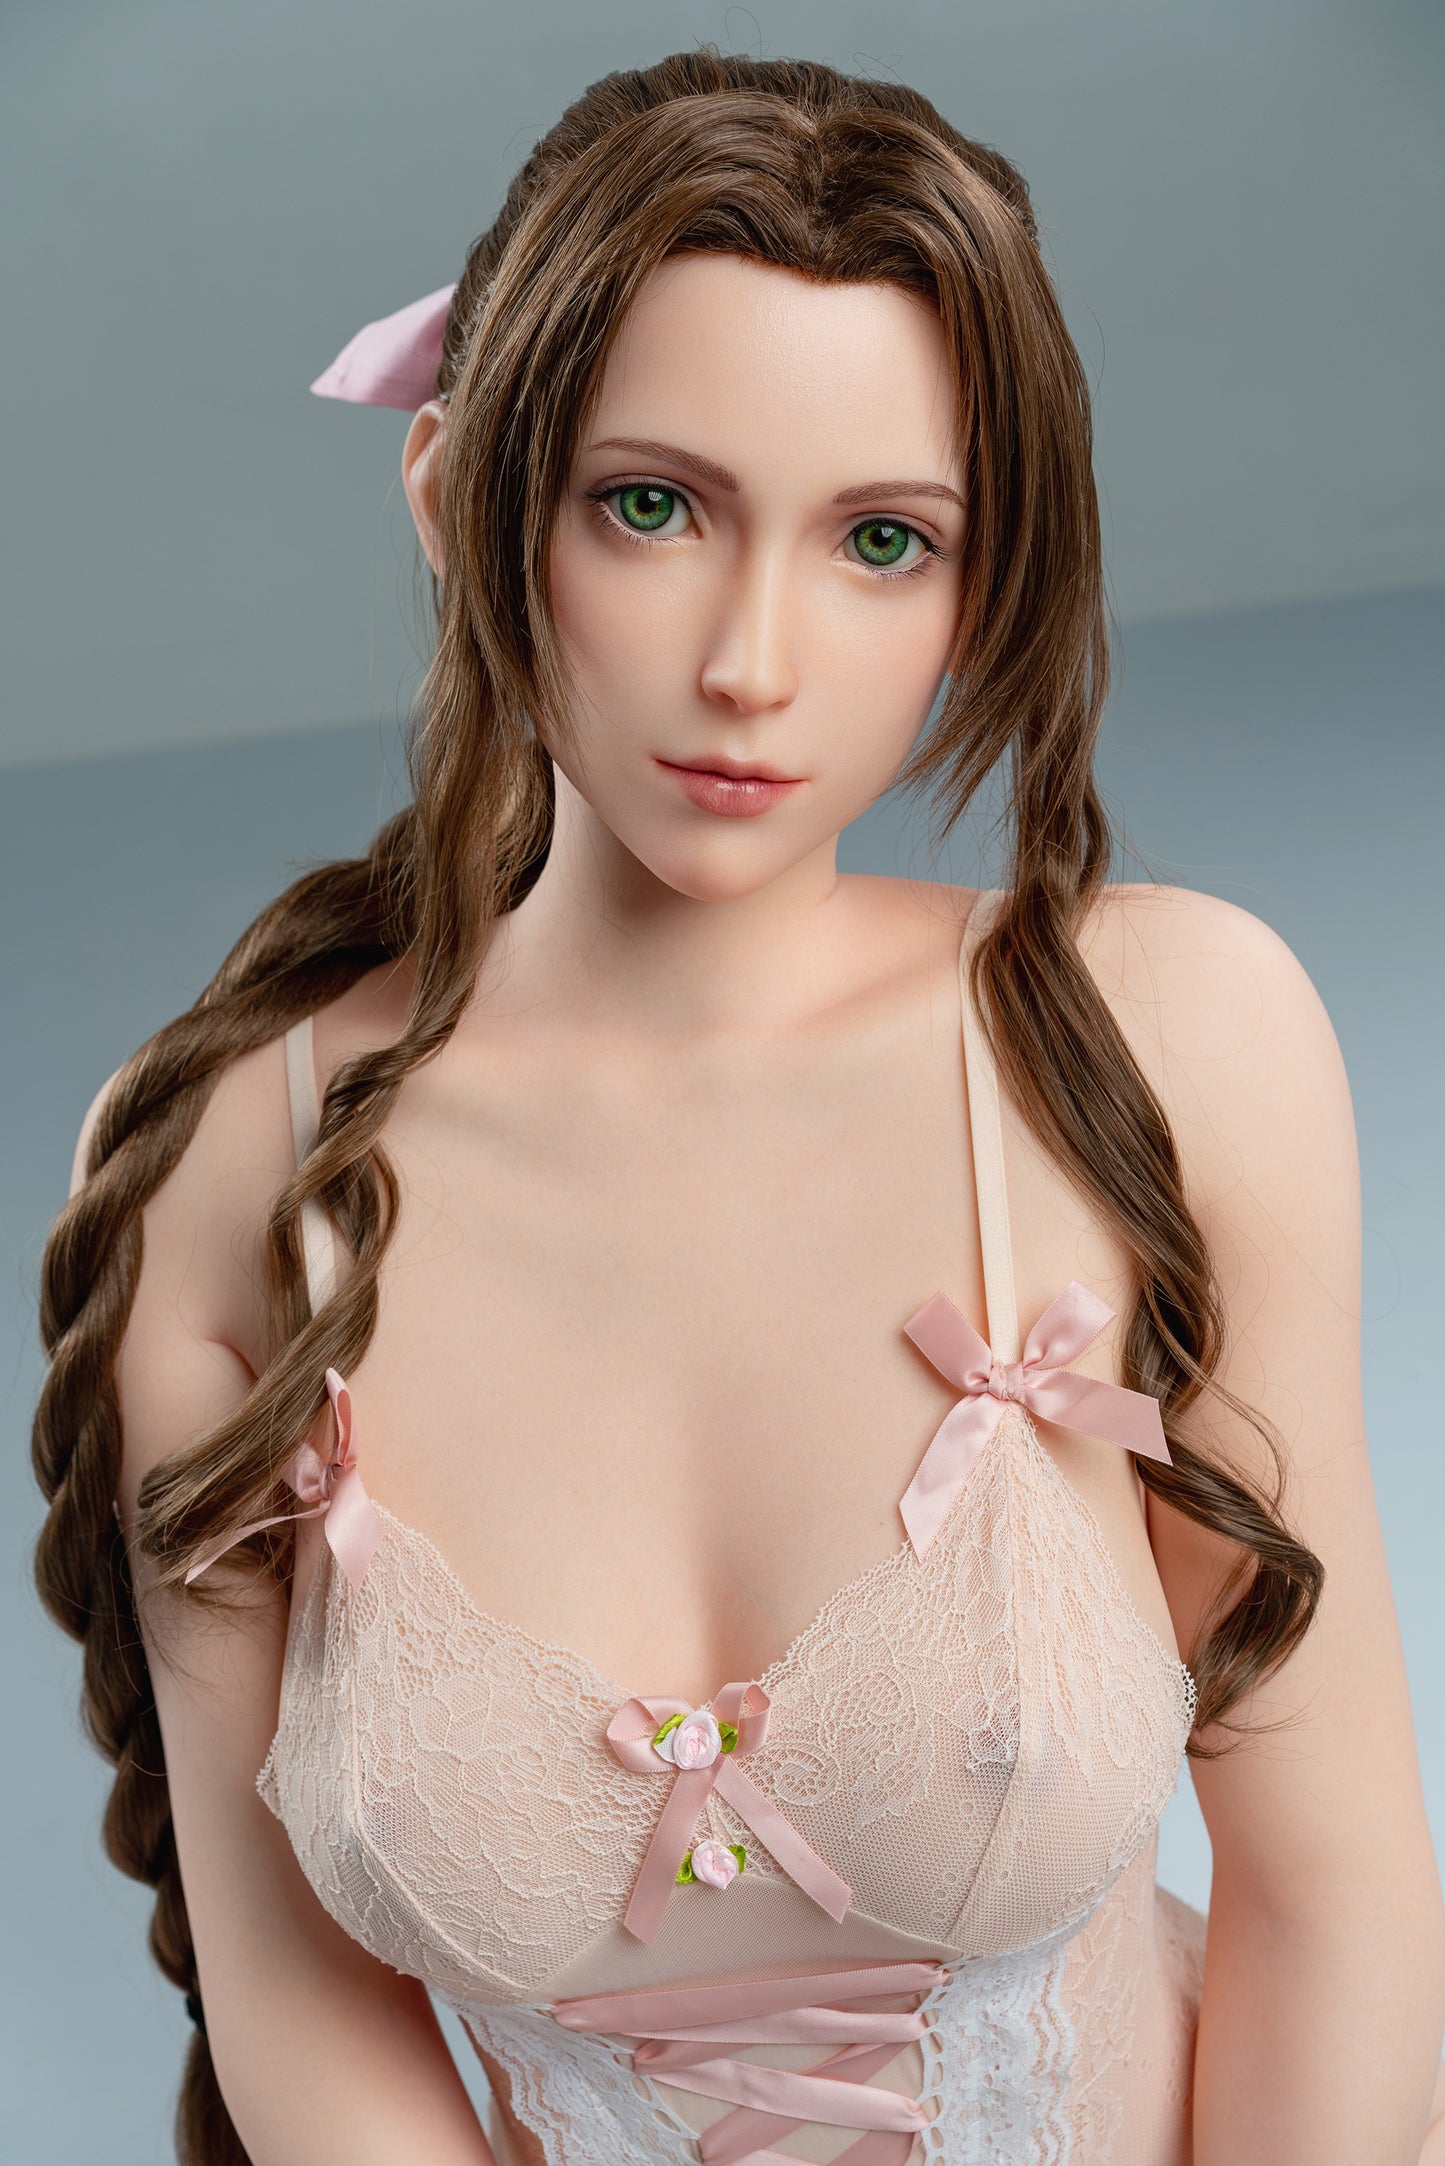 Game Lady Doll #4 Aerith 168cm D Cup